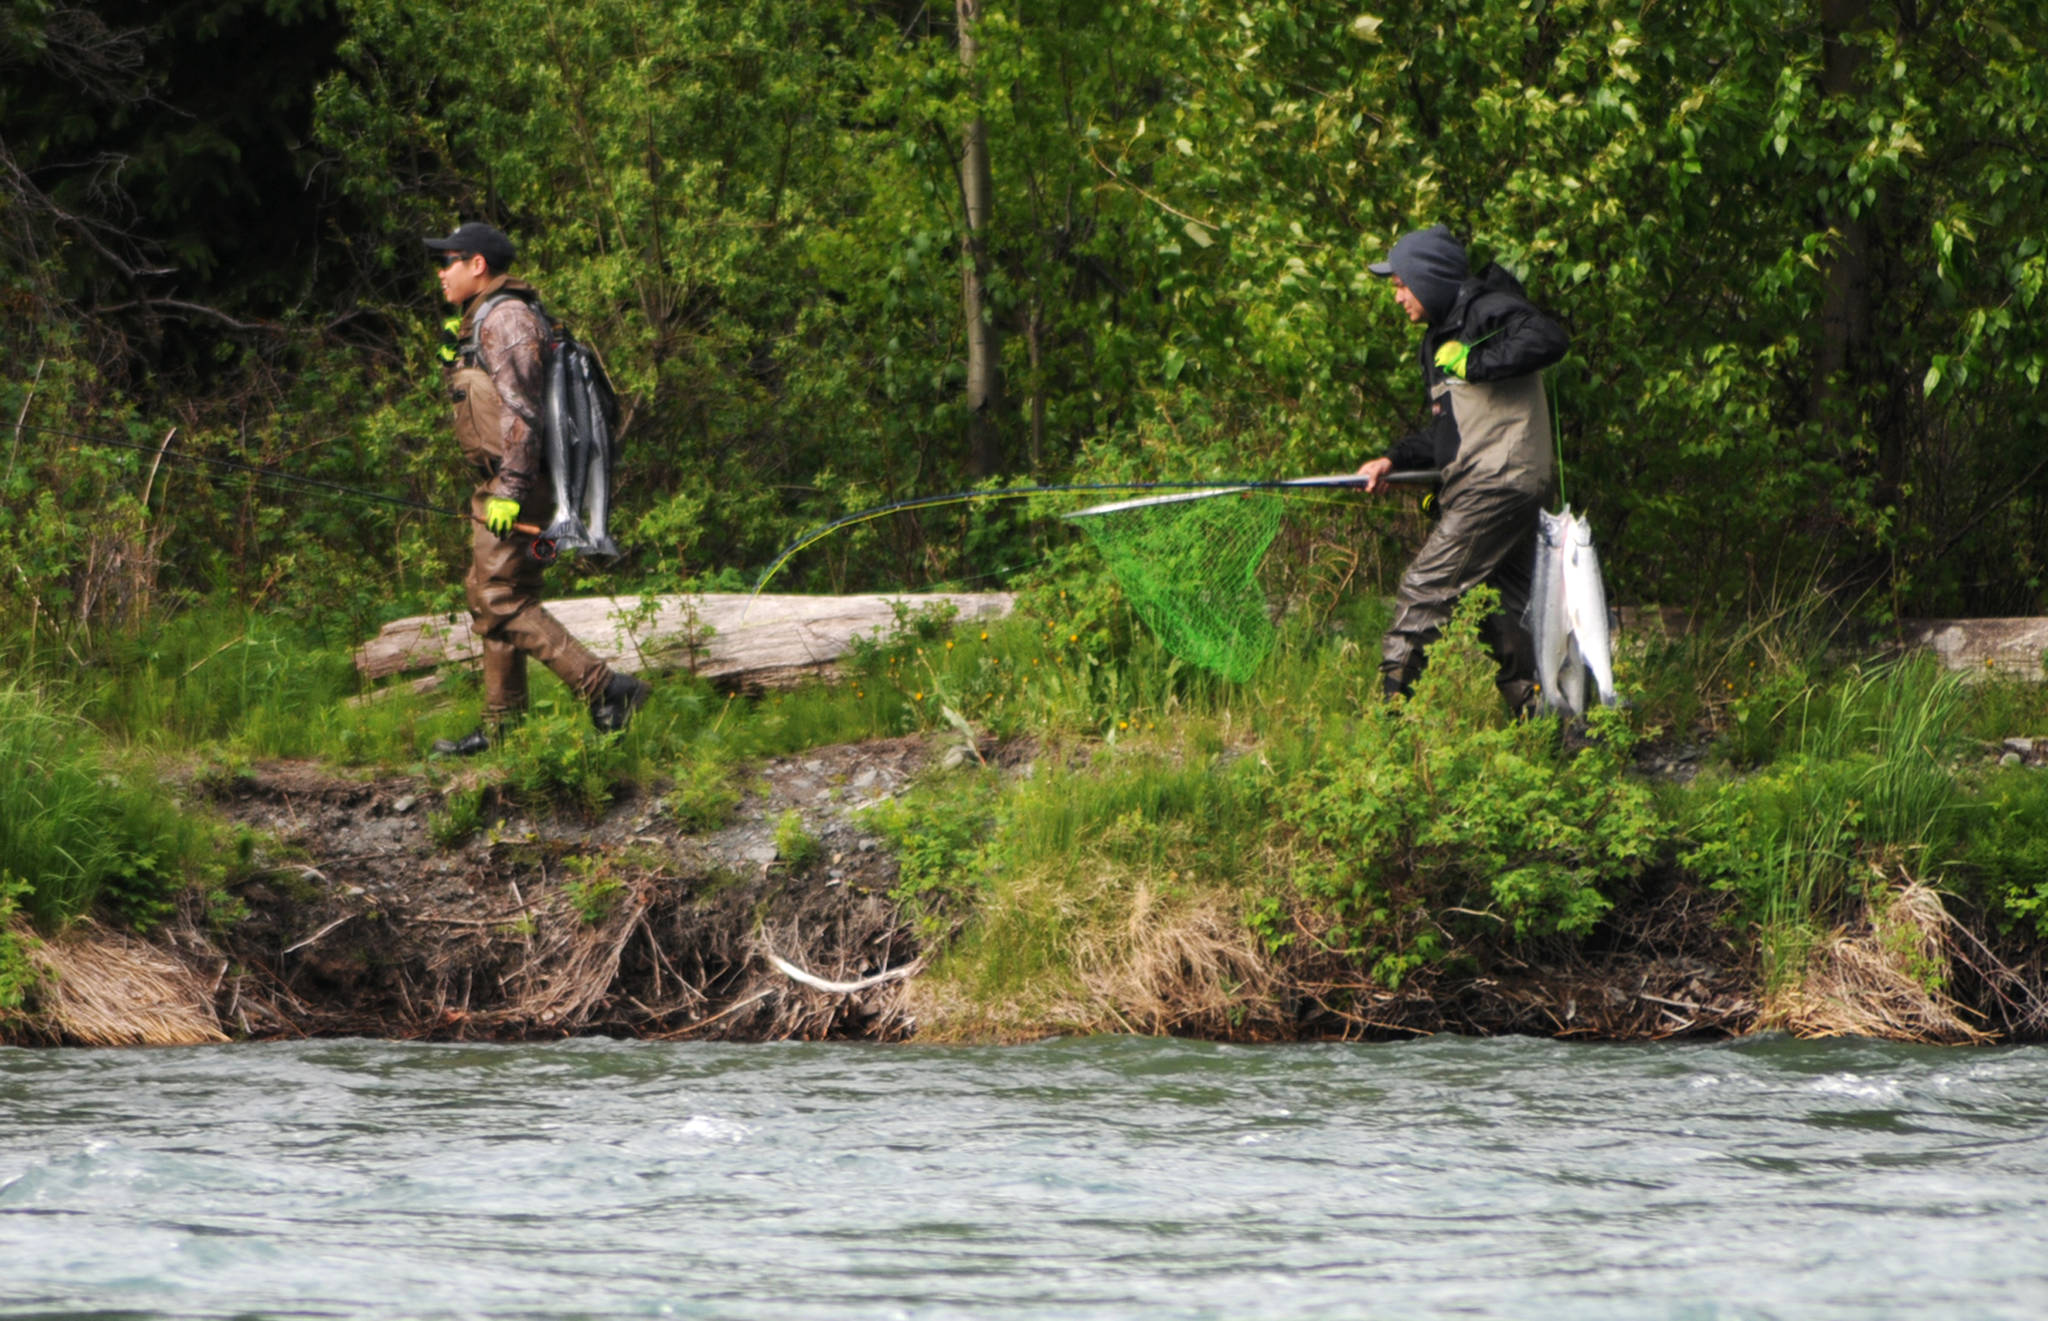 Two lucky anglers pack their sockeye salmon out from the bank of the Kenai River downstream of the confluence with the Russian River on Sunday, June 11, 2017 near Cooper Landing, Alaska. Sunday was the first opening for the popular Russian River sockeye salmon sportfishery, and by midmorning, many anglers were already packing out their limits of salmon while others pulled in their catches. As of Saturday, the Alaska Department of Fish and Game’s weir on Lower Russian Lake had counted 1,027 sockeye, more than triple the 274 that had passed the weir as of the same date in 2016. (Elizabeth Earl/Peninsula Clarion)